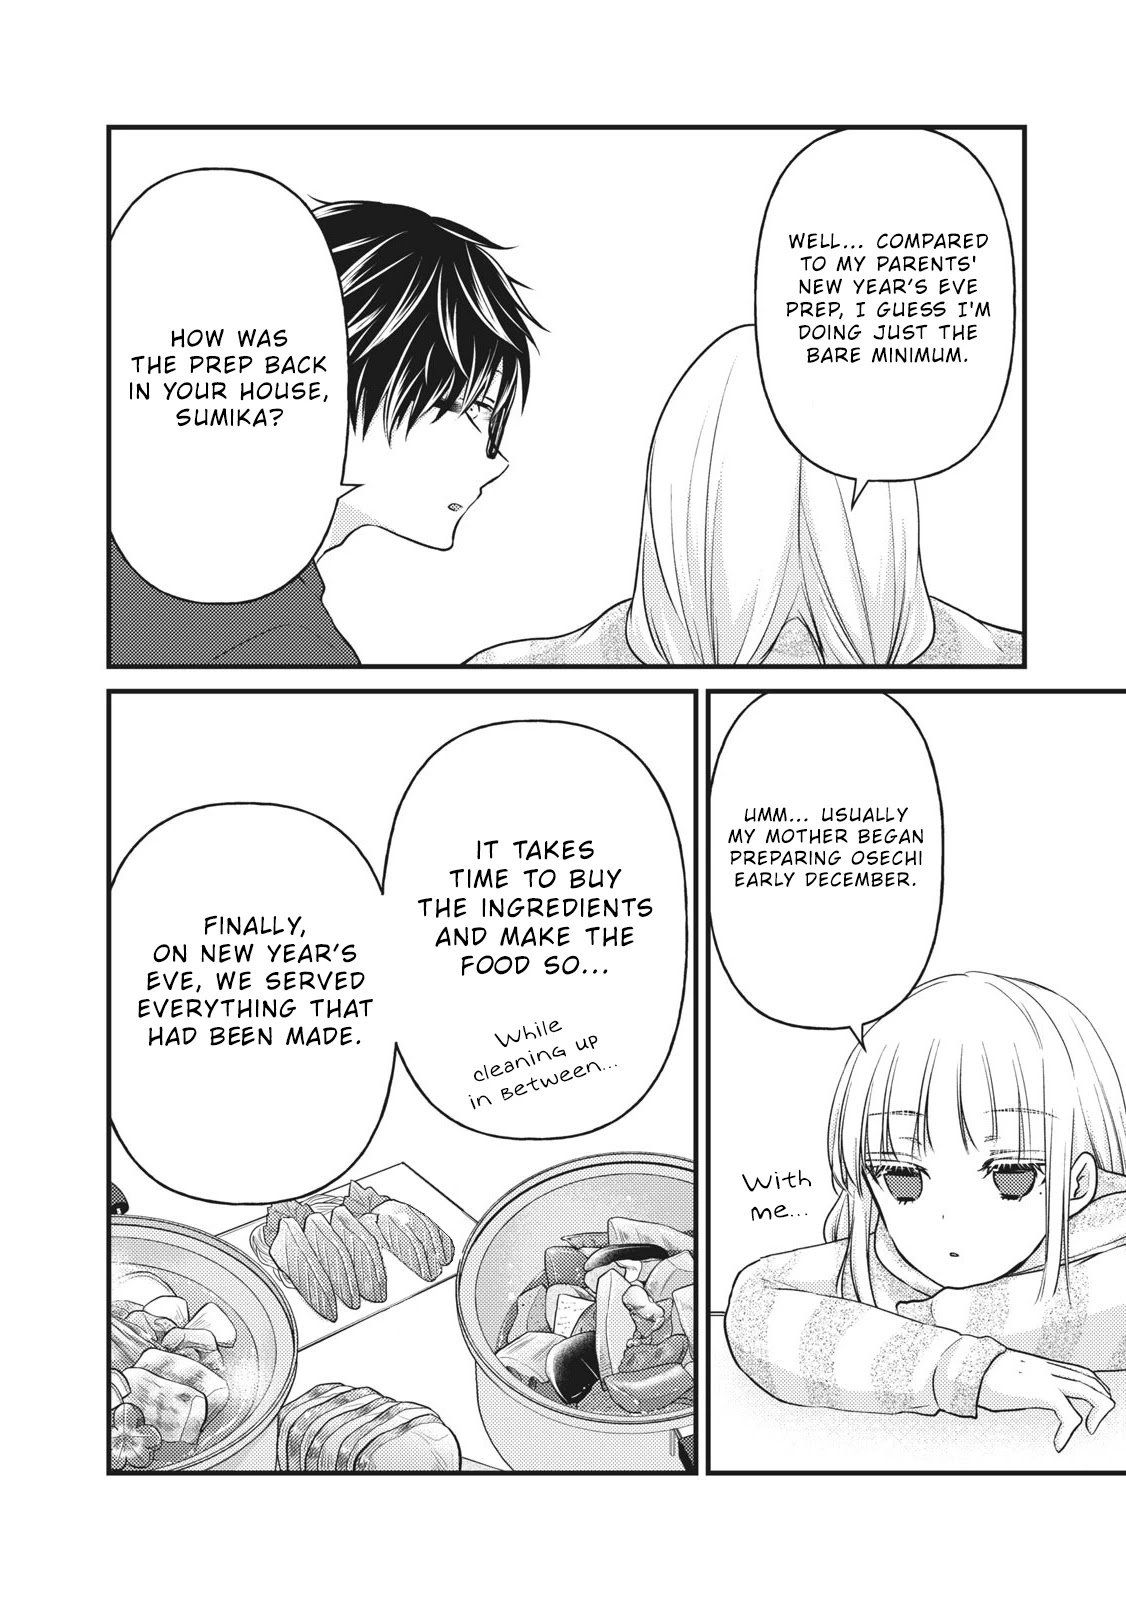 We May Be an Inexperienced Couple but... chapter 74 page 7